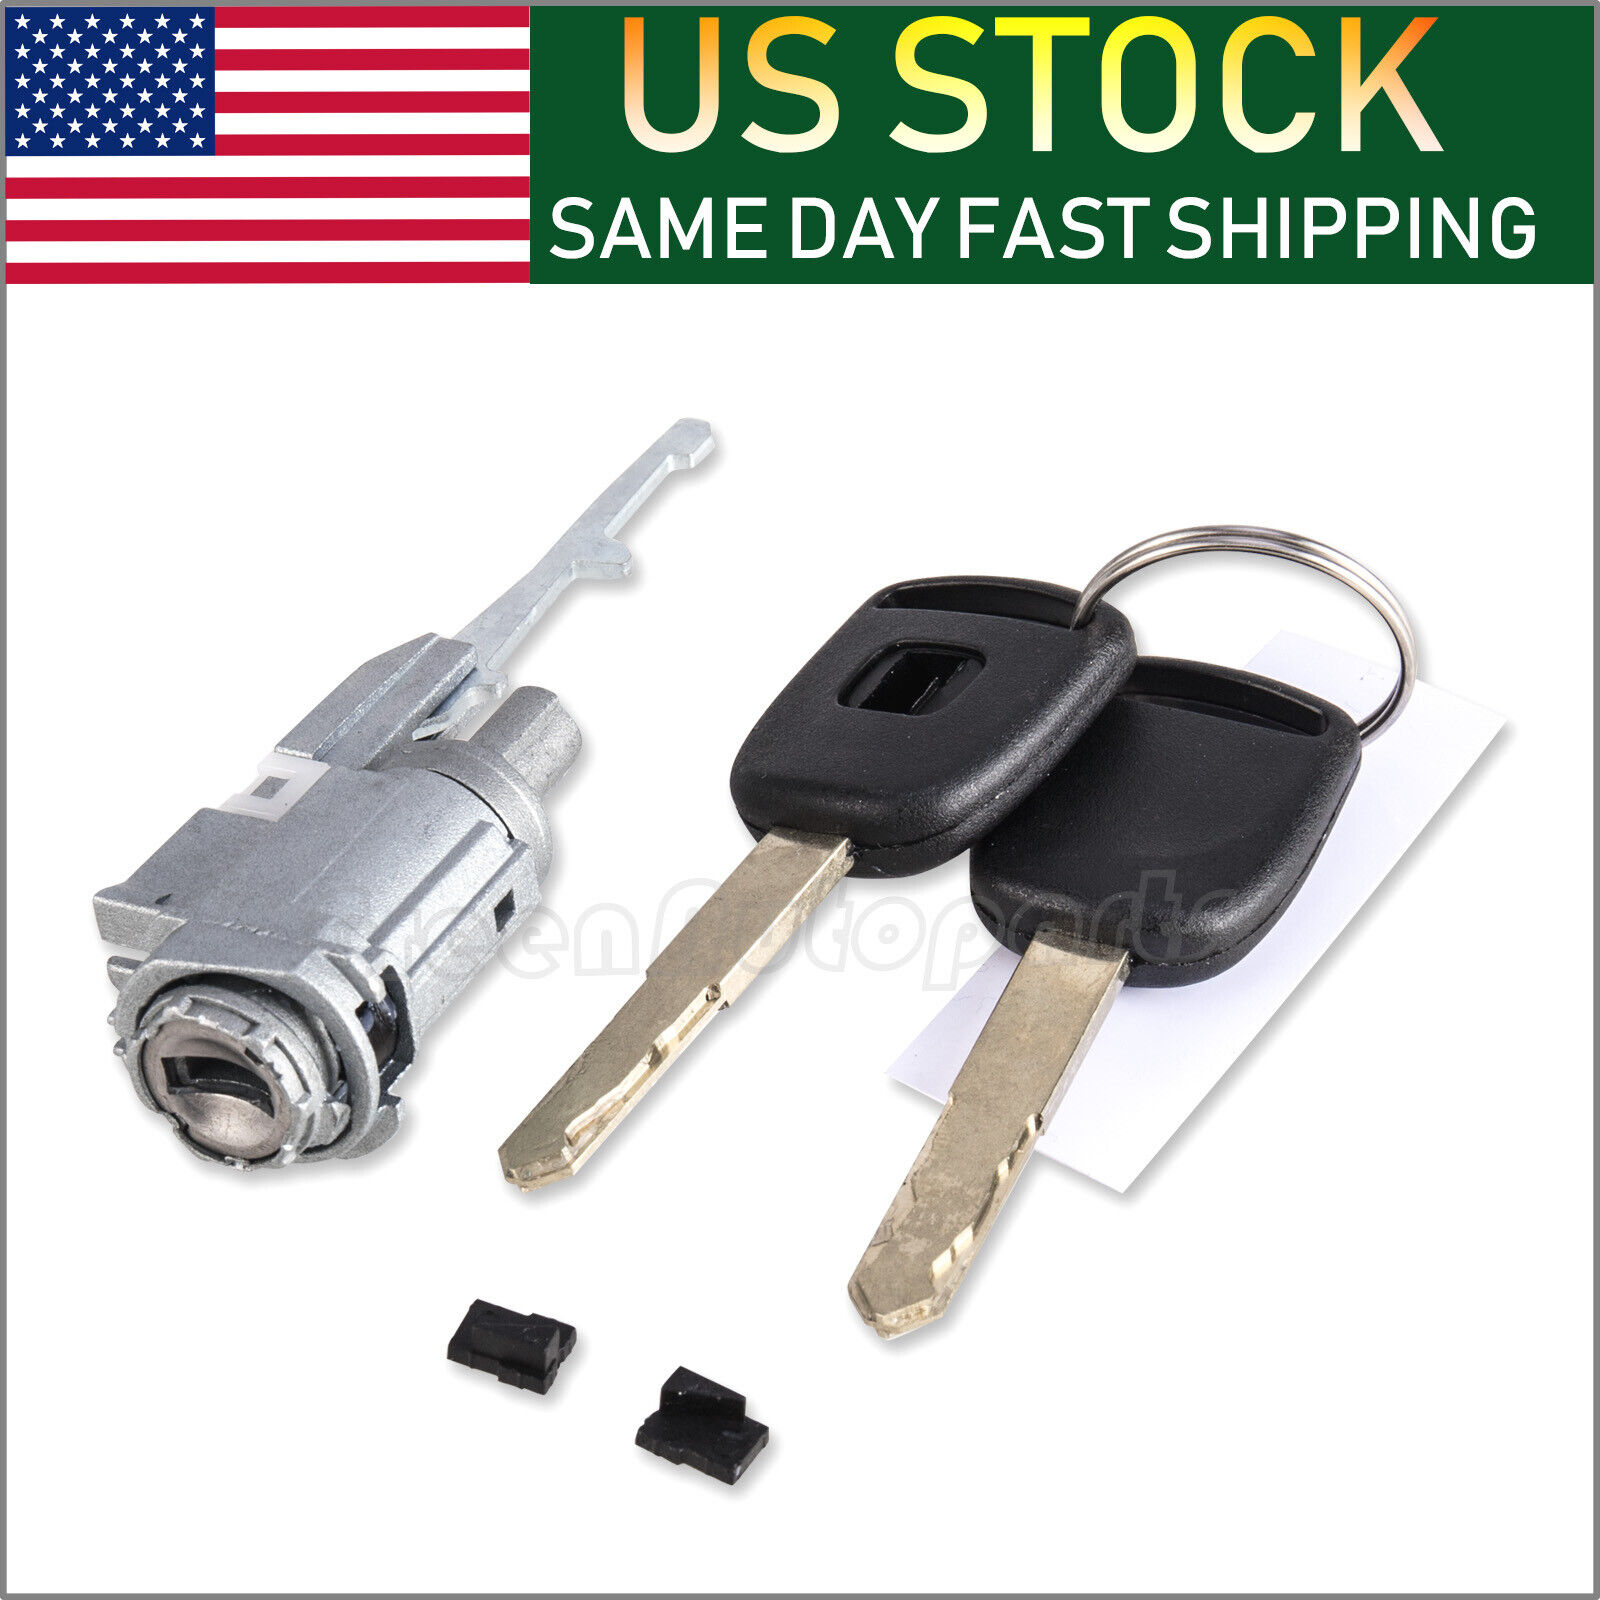 Ignition Switch Cylinder Lock Fits For Honda & Acura Fit 2002 - 2014 W/ 2Keys US